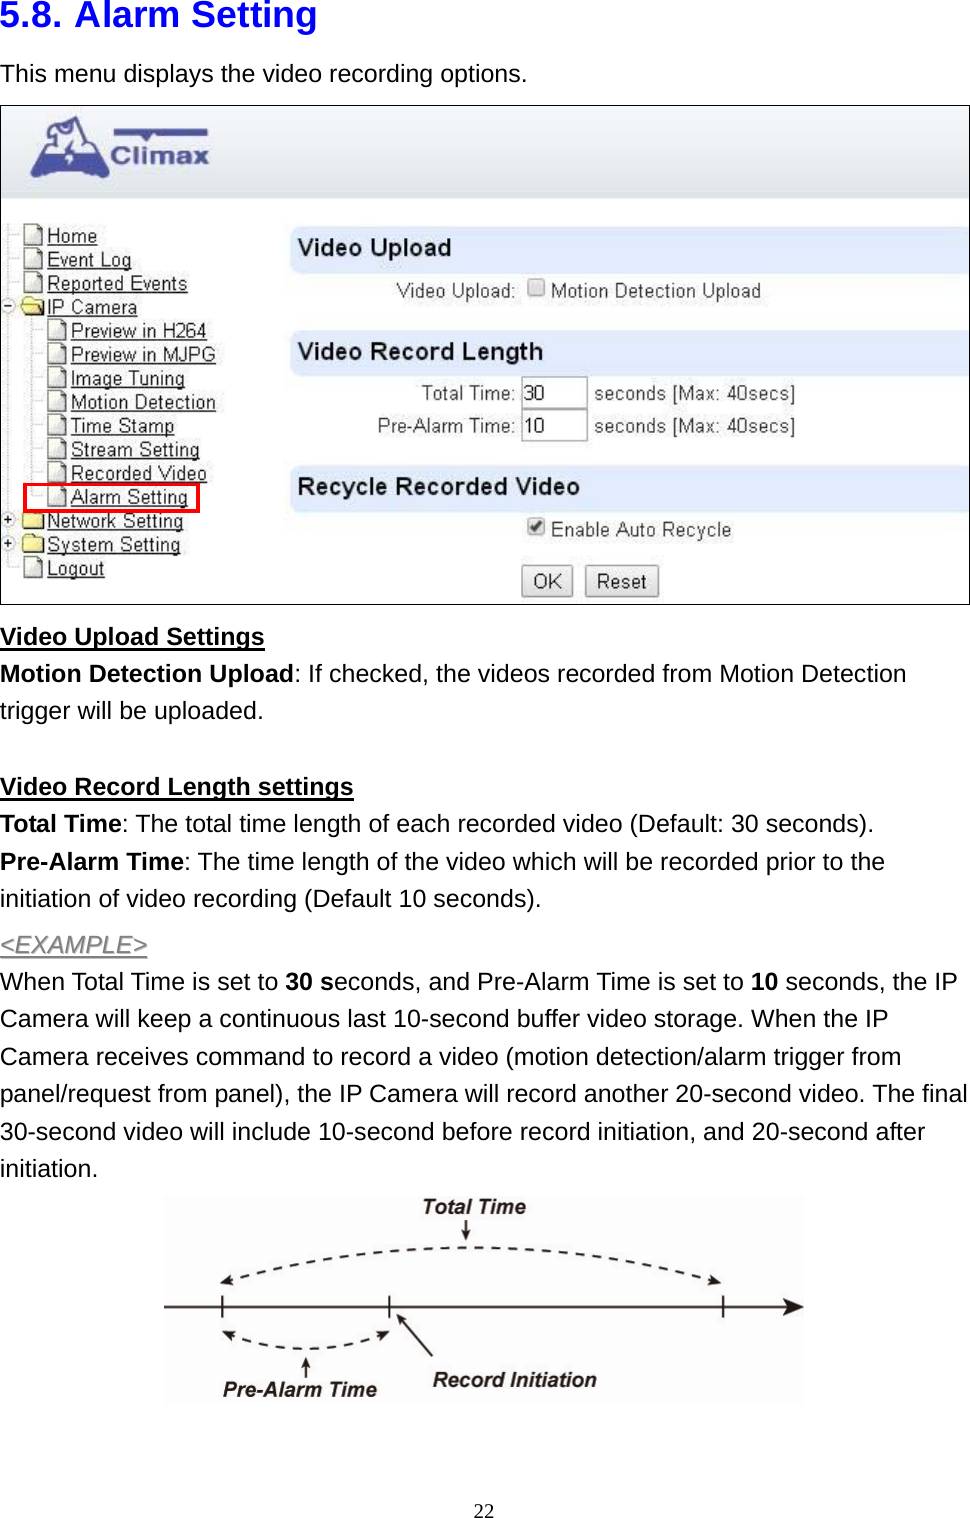 22  5.8. Alarm Setting This menu displays the video recording options.  Video Upload Settings Motion Detection Upload: If checked, the videos recorded from Motion Detection trigger will be uploaded.  Video Record Length settings Total Time: The total time length of each recorded video (Default: 30 seconds). Pre-Alarm Time: The time length of the video which will be recorded prior to the initiation of video recording (Default 10 seconds). &lt;&lt;EEXXAAMMPPLLEE&gt;&gt;  When Total Time is set to 30 seconds, and Pre-Alarm Time is set to 10 seconds, the IP Camera will keep a continuous last 10-second buffer video storage. When the IP Camera receives command to record a video (motion detection/alarm trigger from panel/request from panel), the IP Camera will record another 20-second video. The final 30-second video will include 10-second before record initiation, and 20-second after initiation.    